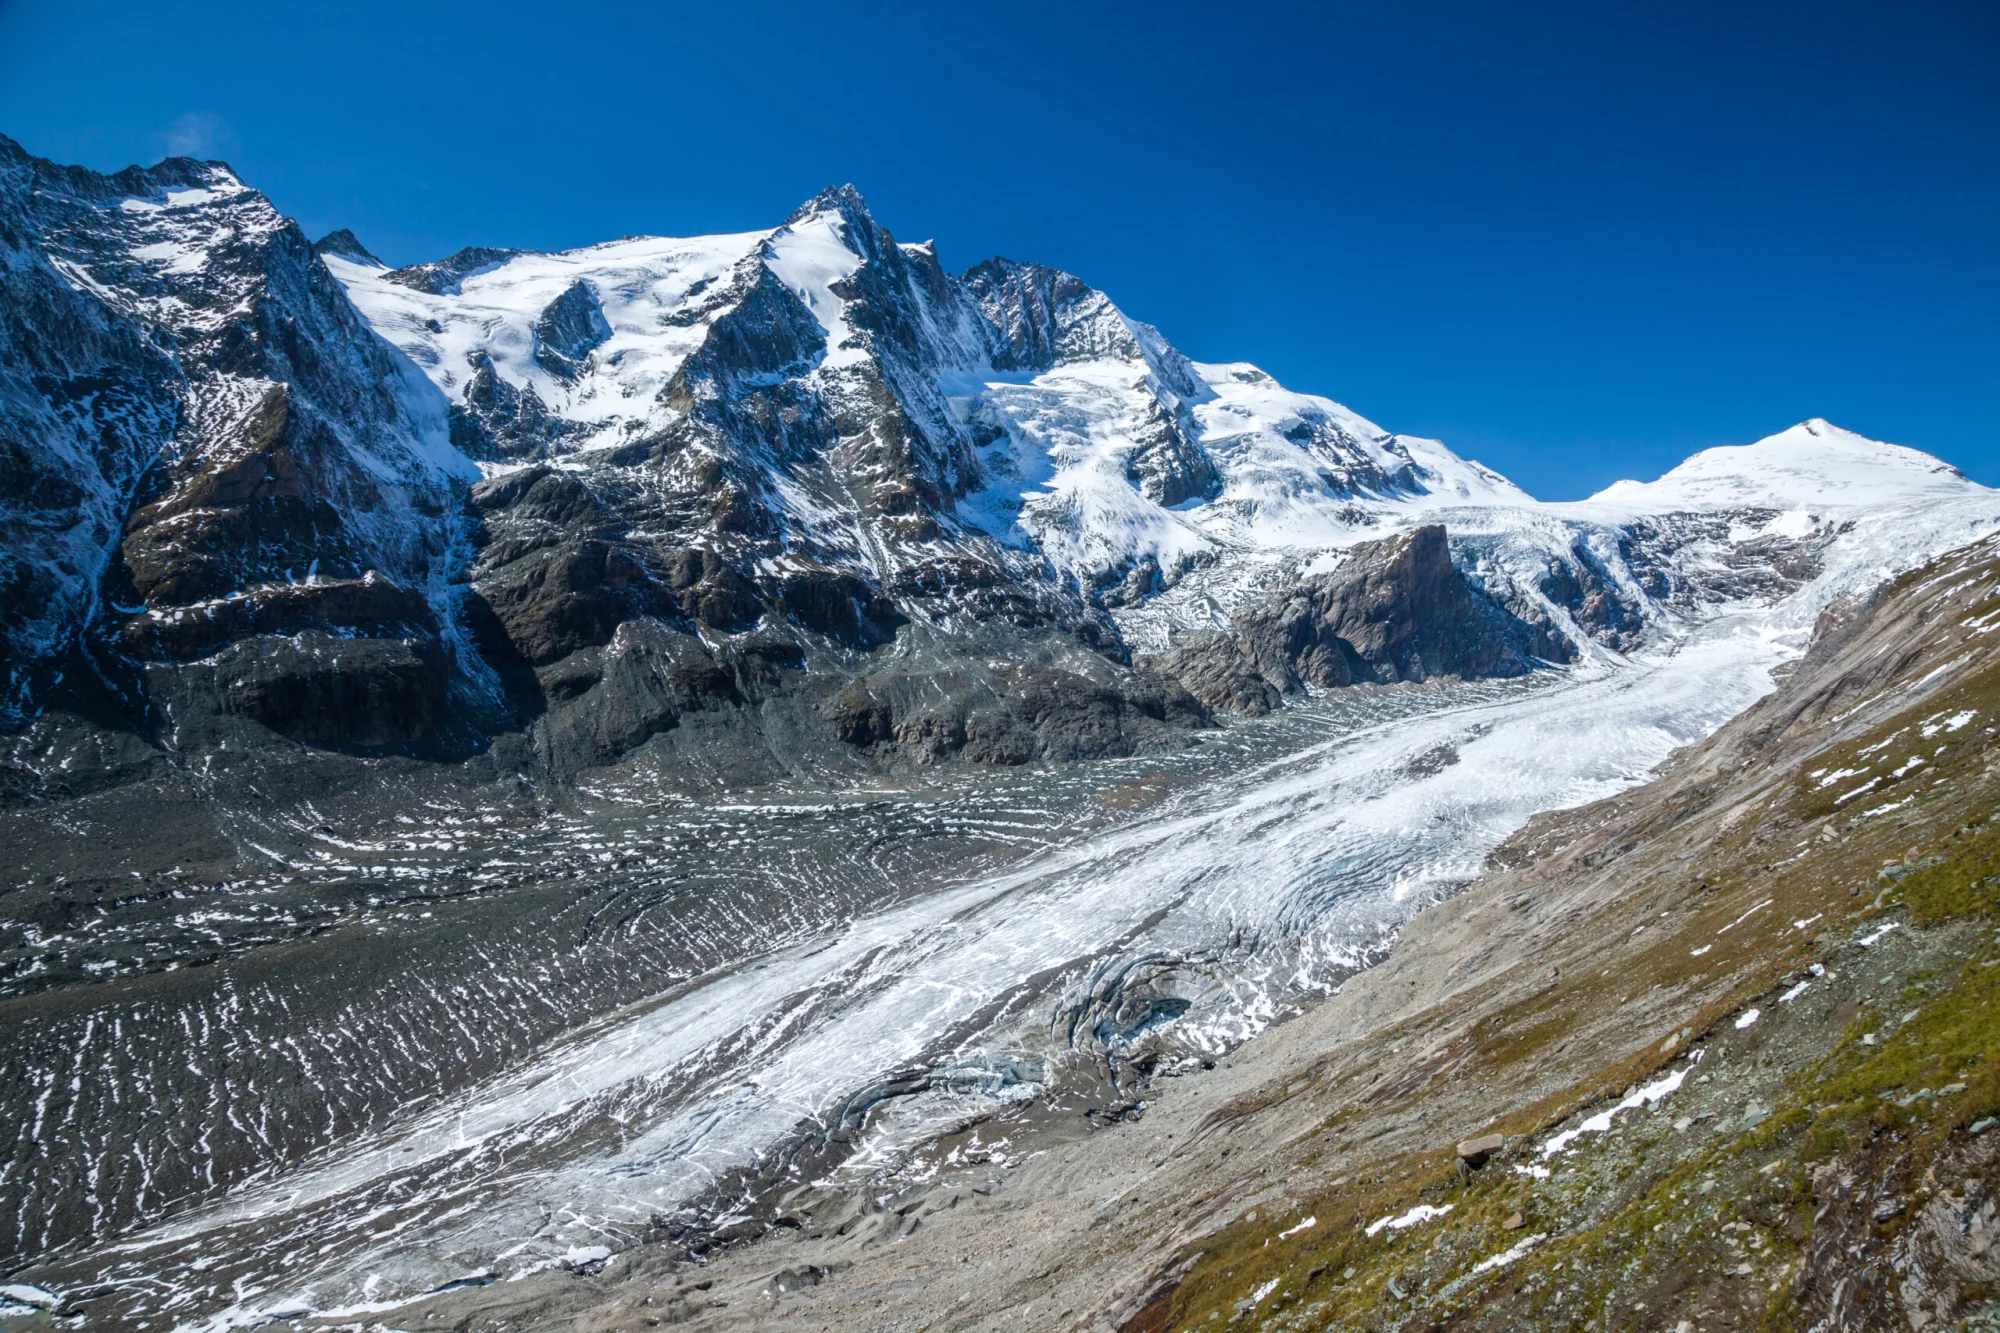 Grossglockner, the highest mountain in Austria along with the Pasterze glacier, Europe